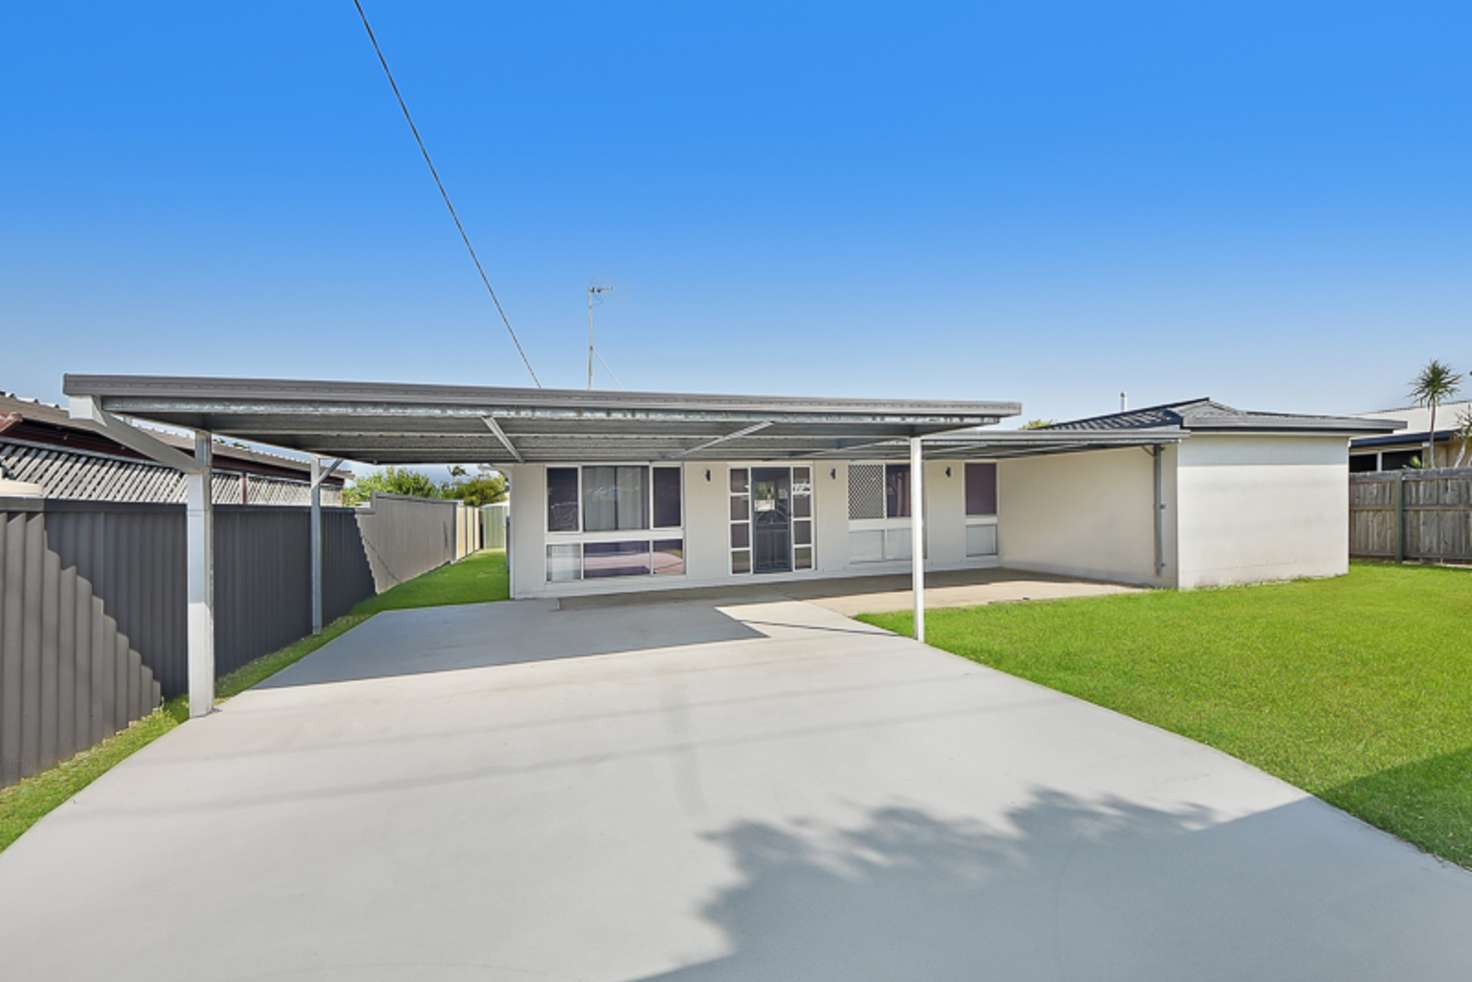 Main view of Homely house listing, 601 Nicklin Way, Wurtulla QLD 4575